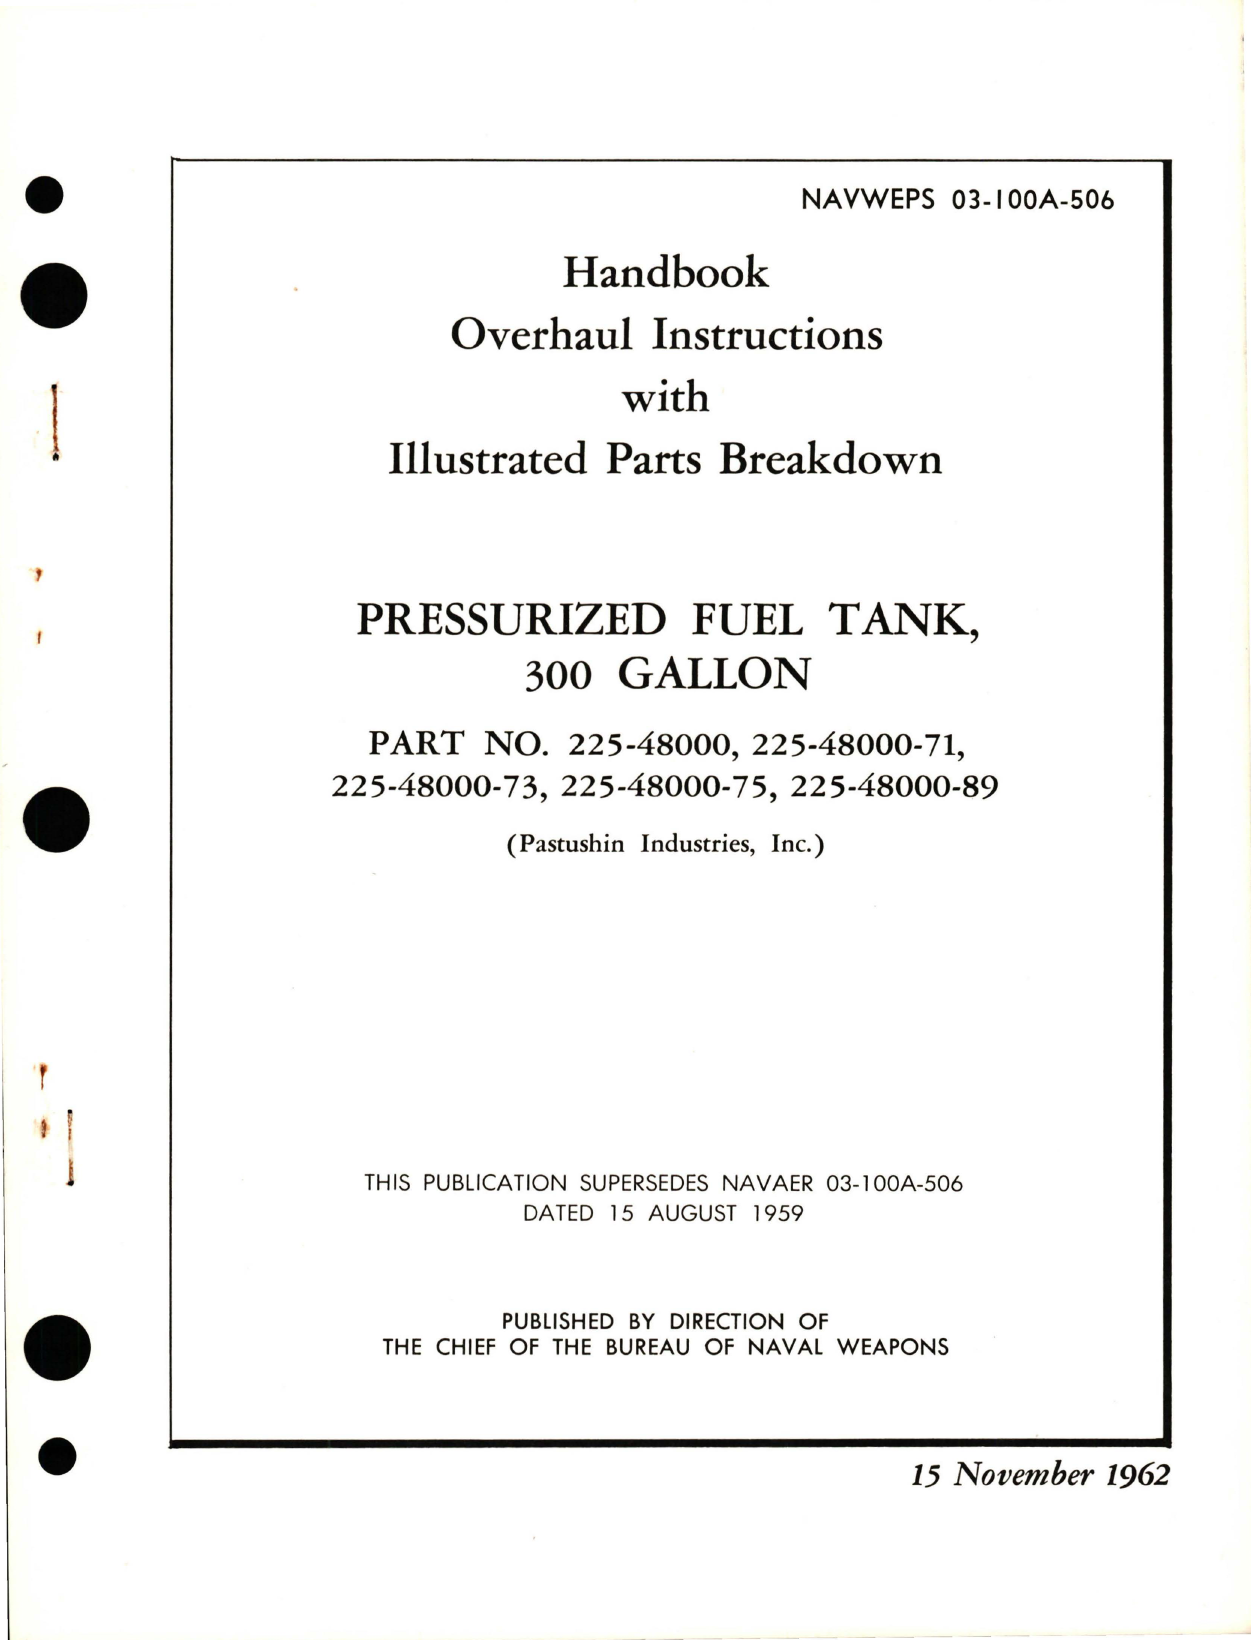 Sample page 1 from AirCorps Library document: Overhaul Instructions with Illustrated Parts Breakdown for Pressurized Fuel Tank - 300 Gal - Parts 225-48000, 225-48000-71, 225-48000-73, 225-48000-75, and 225-48000-89